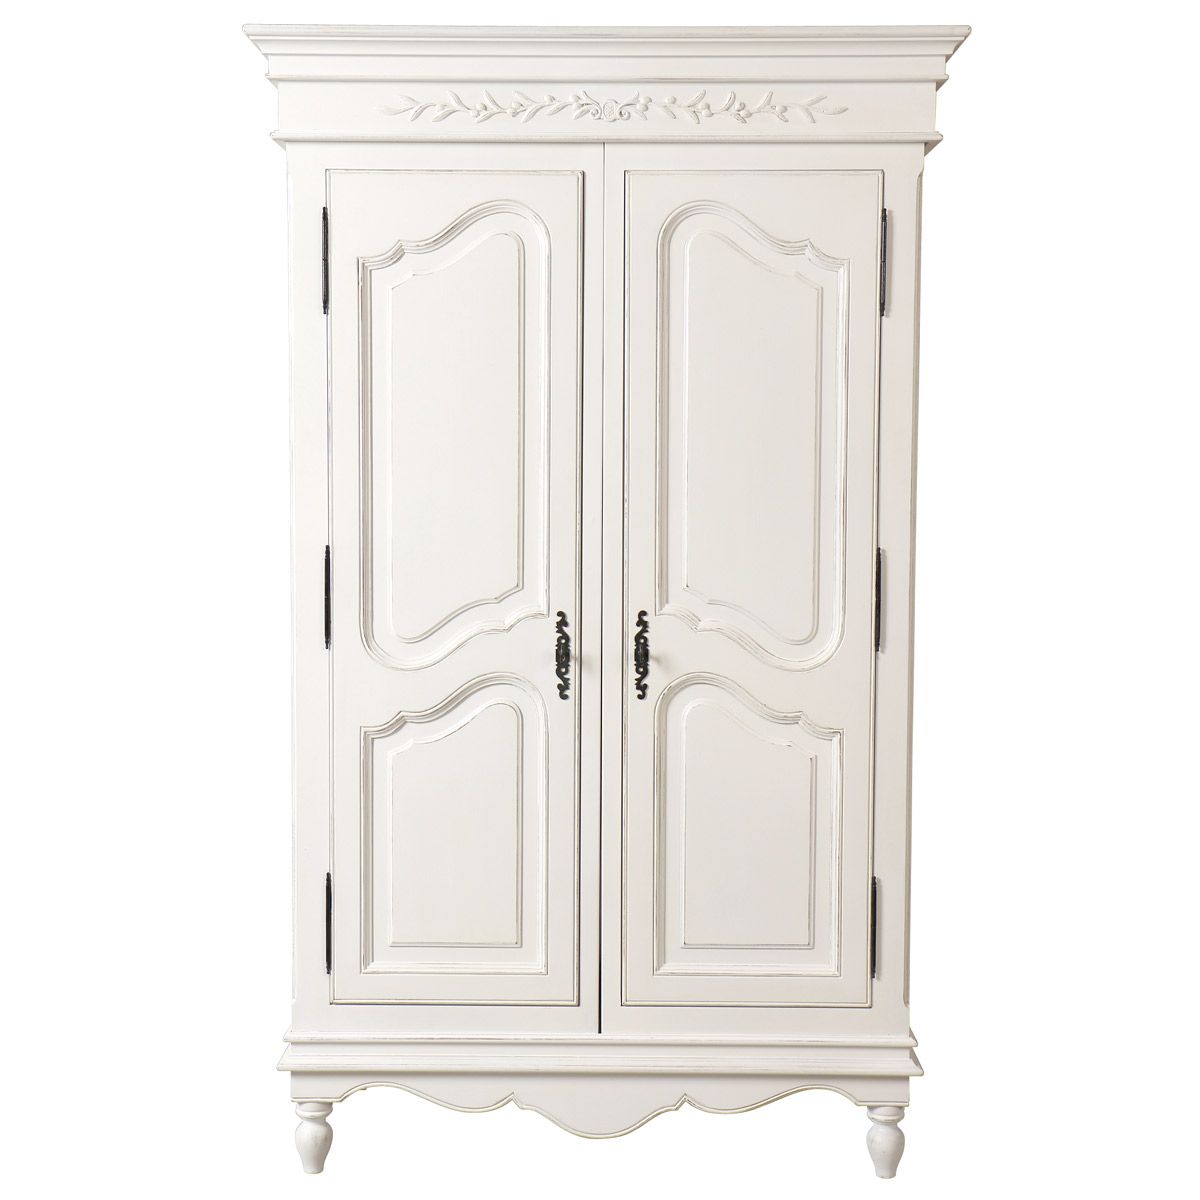 French Armoire Wardrobe – Romance – Low Cost Delivery, Nationwide Throughout French Armoires Wardrobes (Gallery 9 of 20)